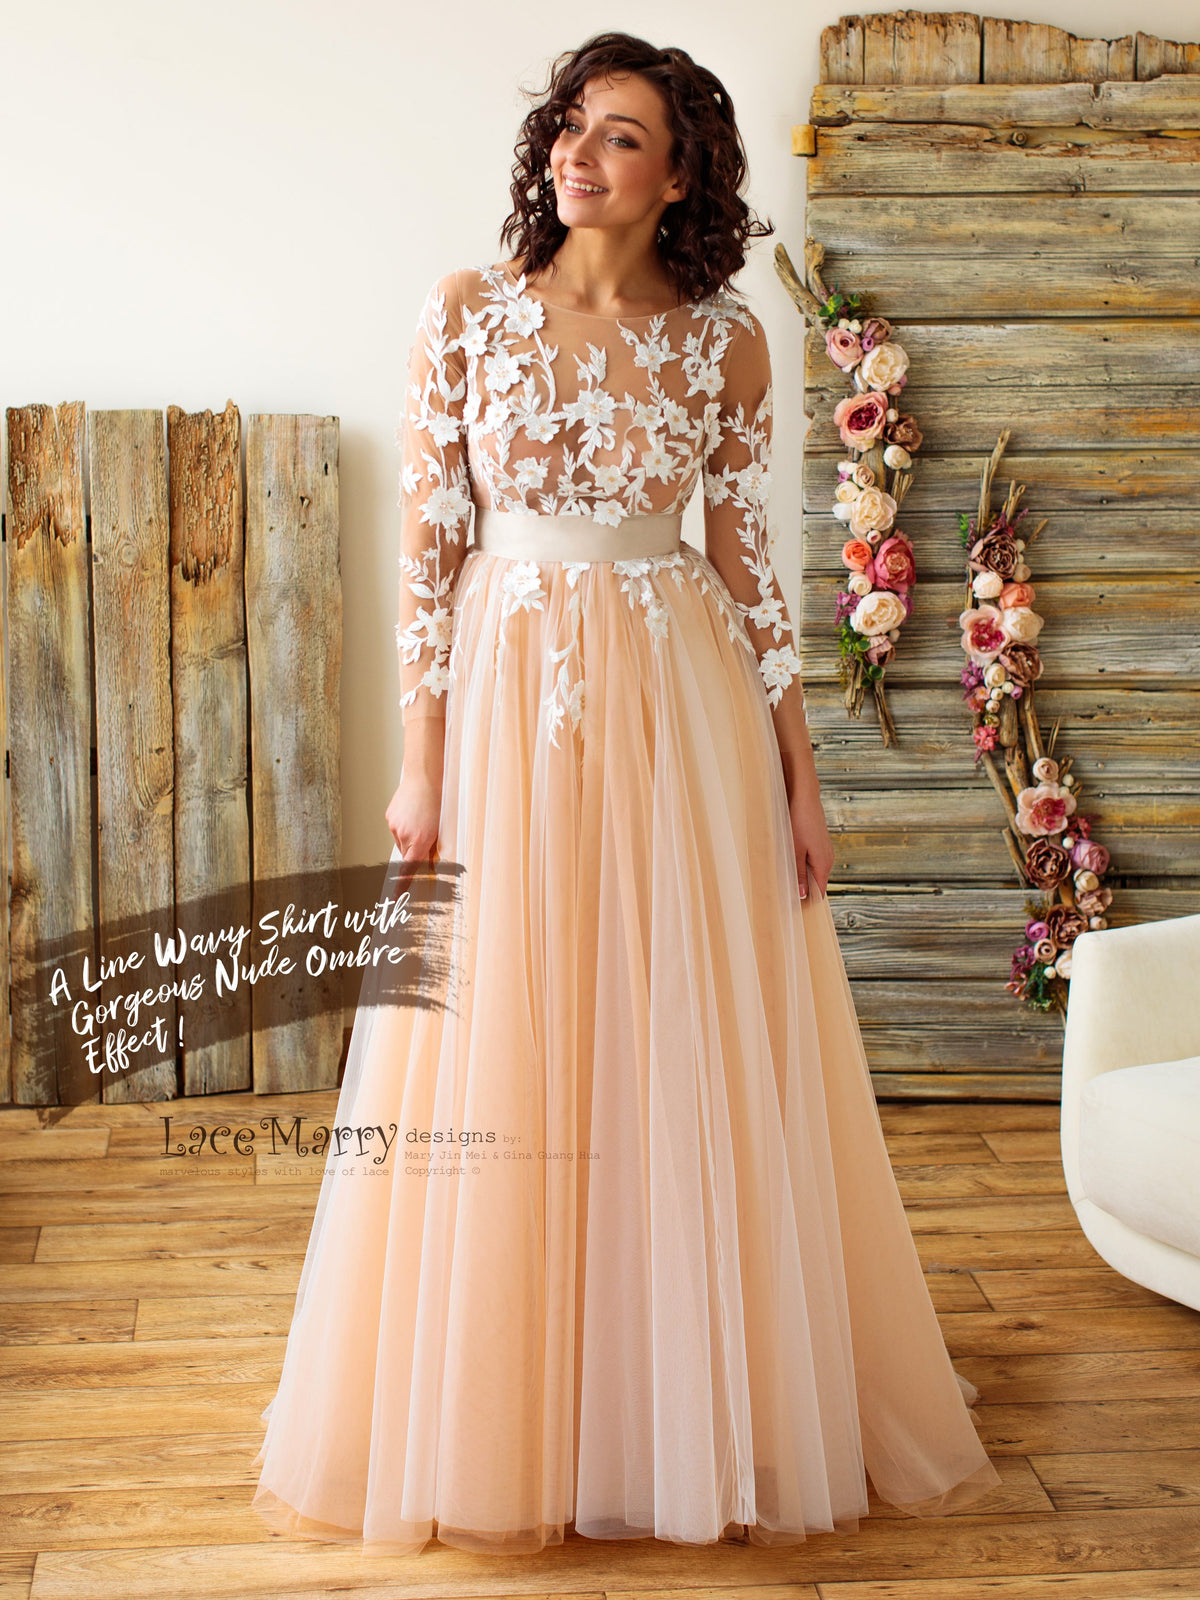 Long Lace Sleeves Wedding Dress with Ombre Skirt